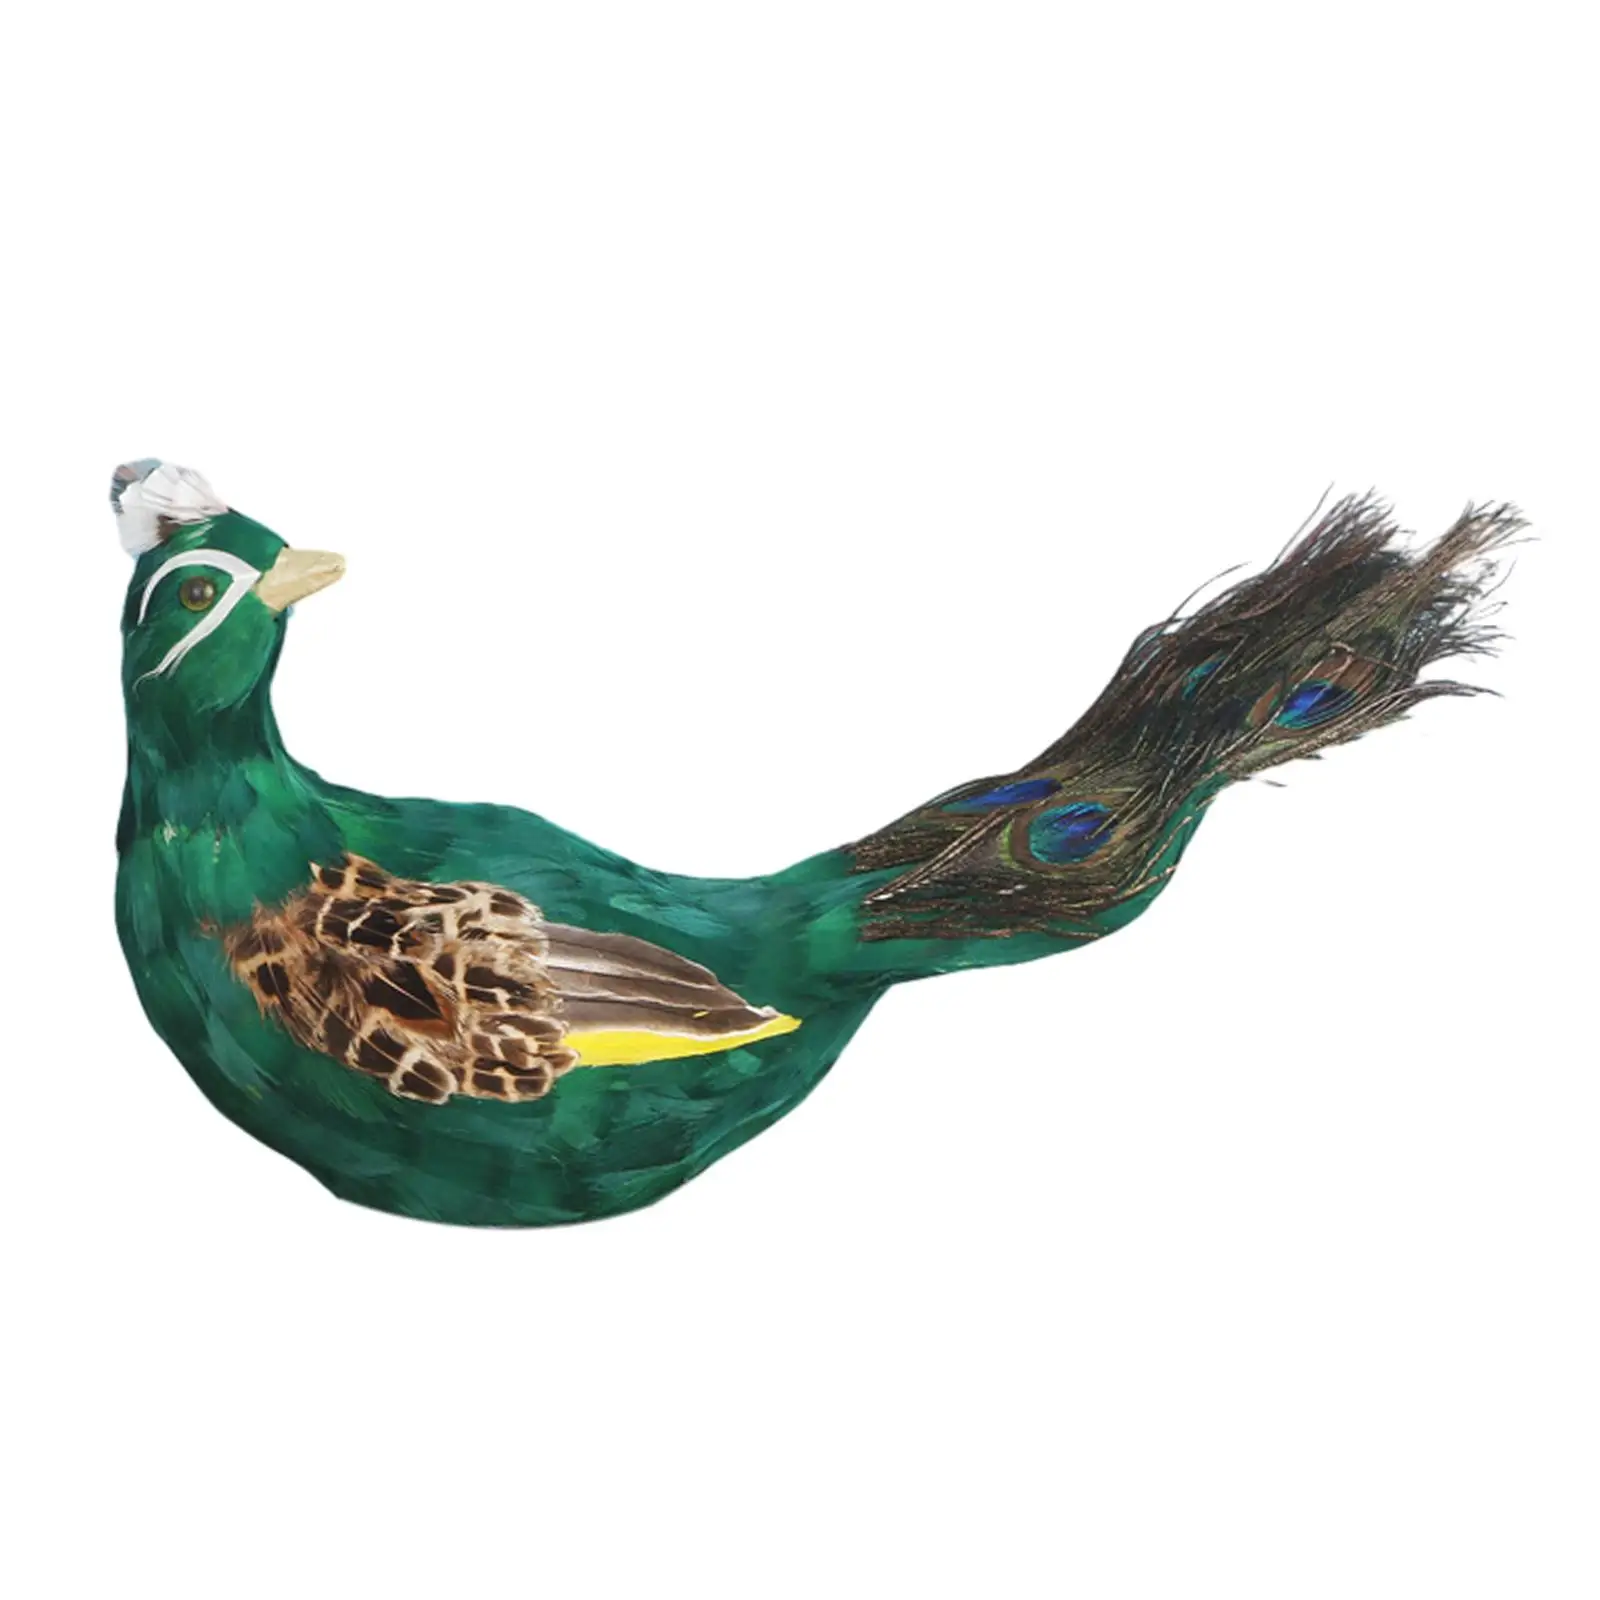 Artificial Peacock Ornament Figurine Long Tail Simulation Peacock Decoration for Home Festivals Living Room Fireplace Holiday